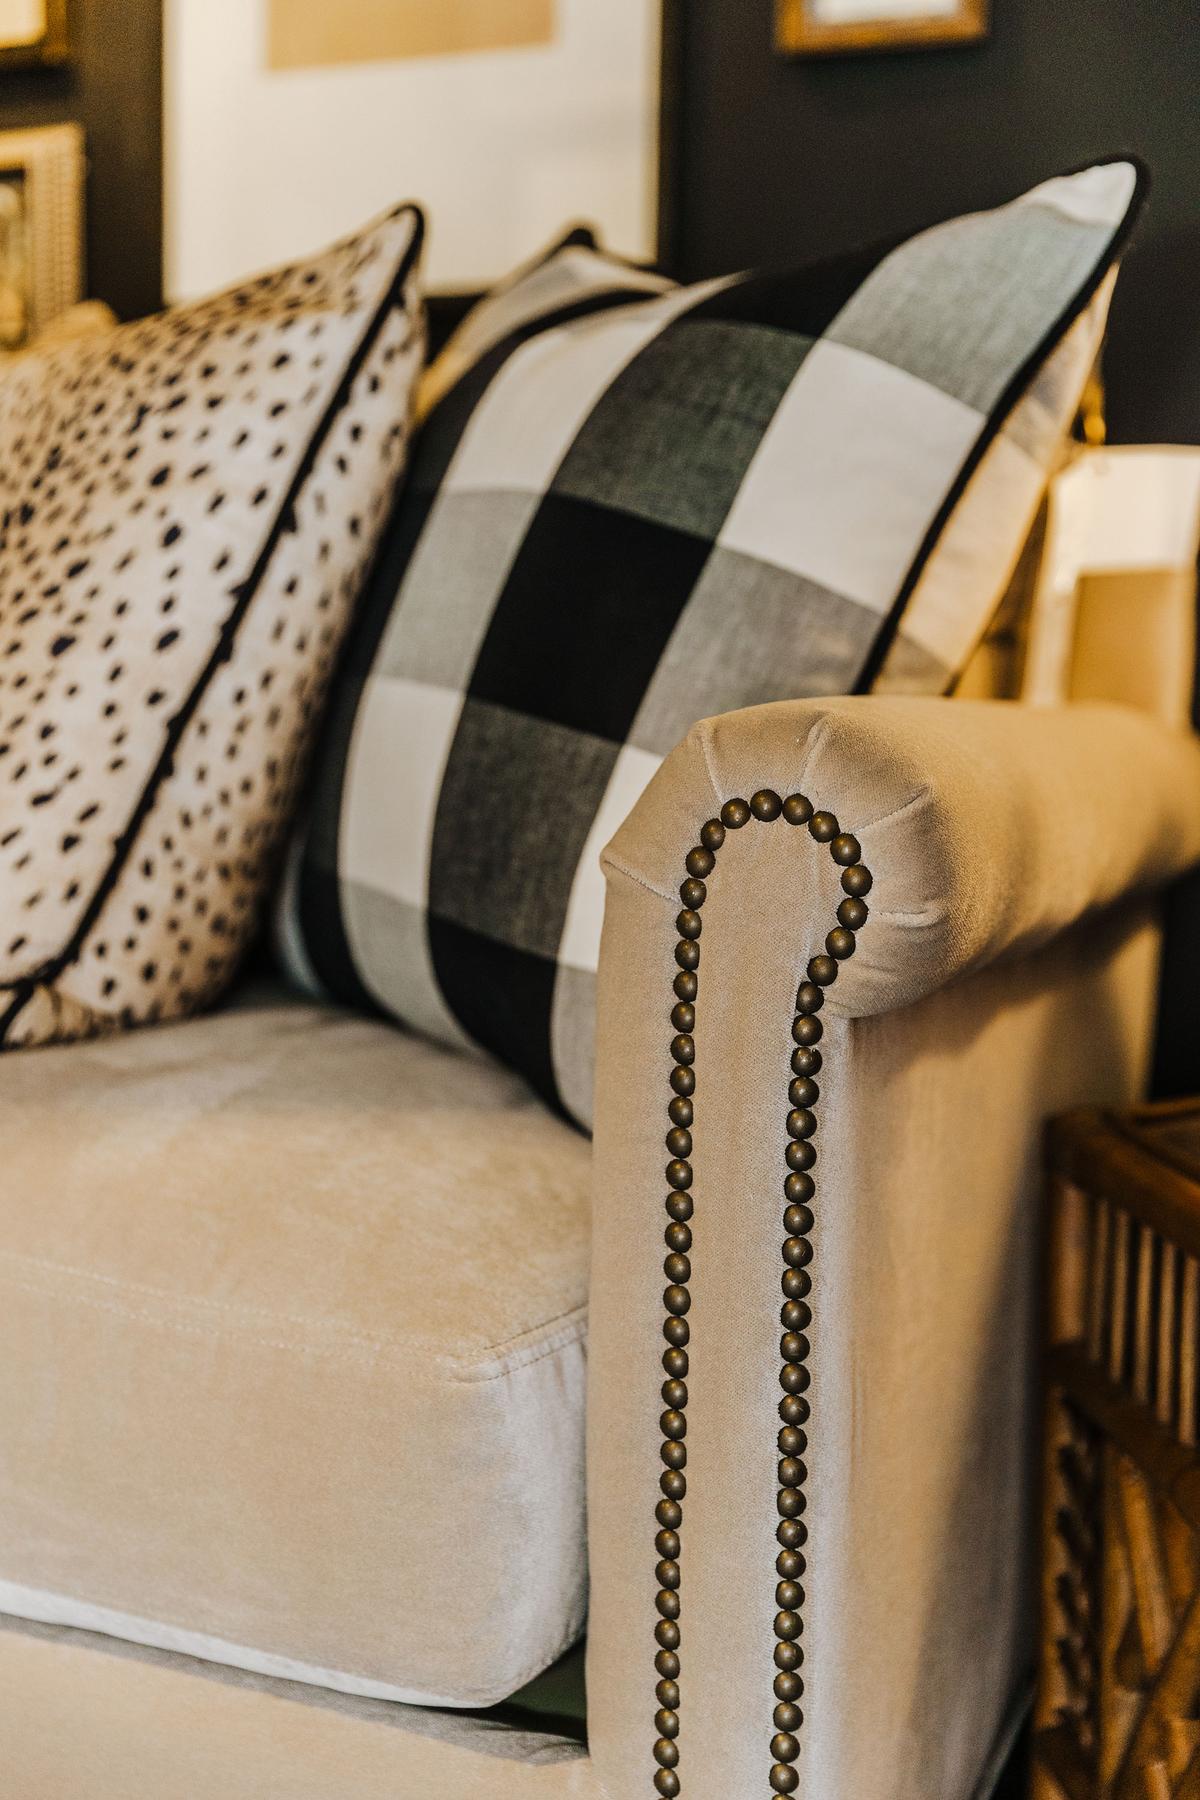 A hammered nail detail adds a sophisticated flair to this velvet sofa. (Handout/TNS)